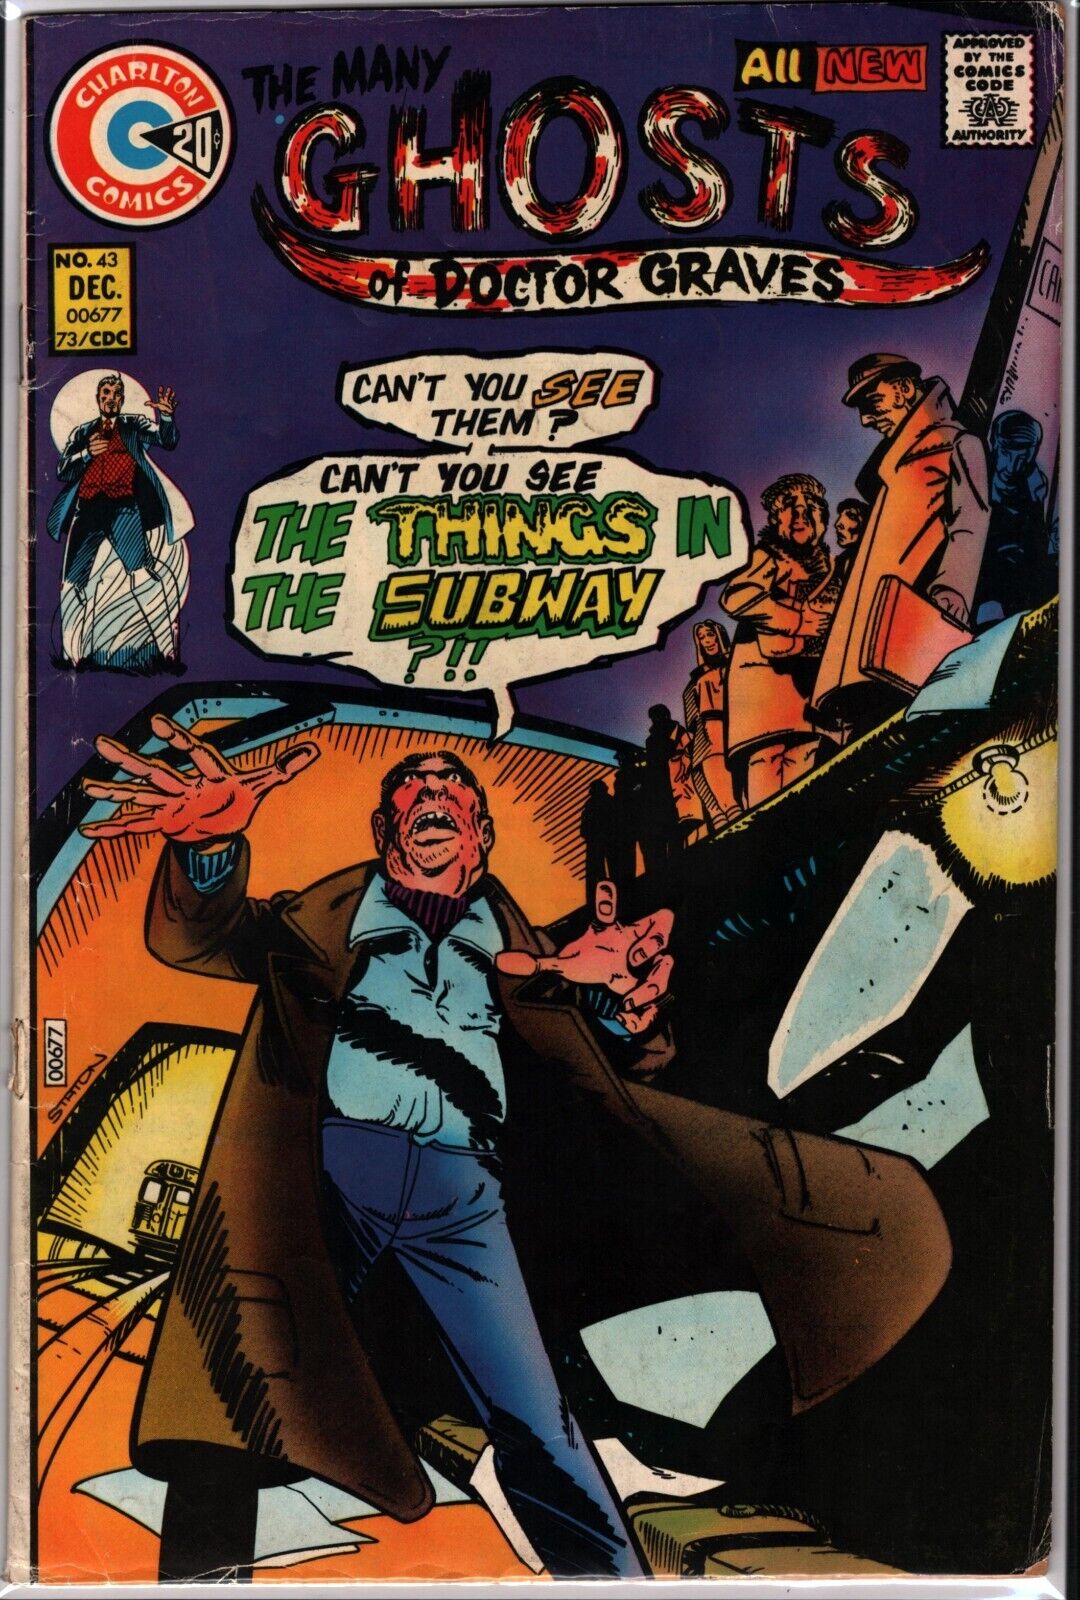 47020: Charlton MANY GHOSTS OF DOCTOR GRAVES #43 VG Grade